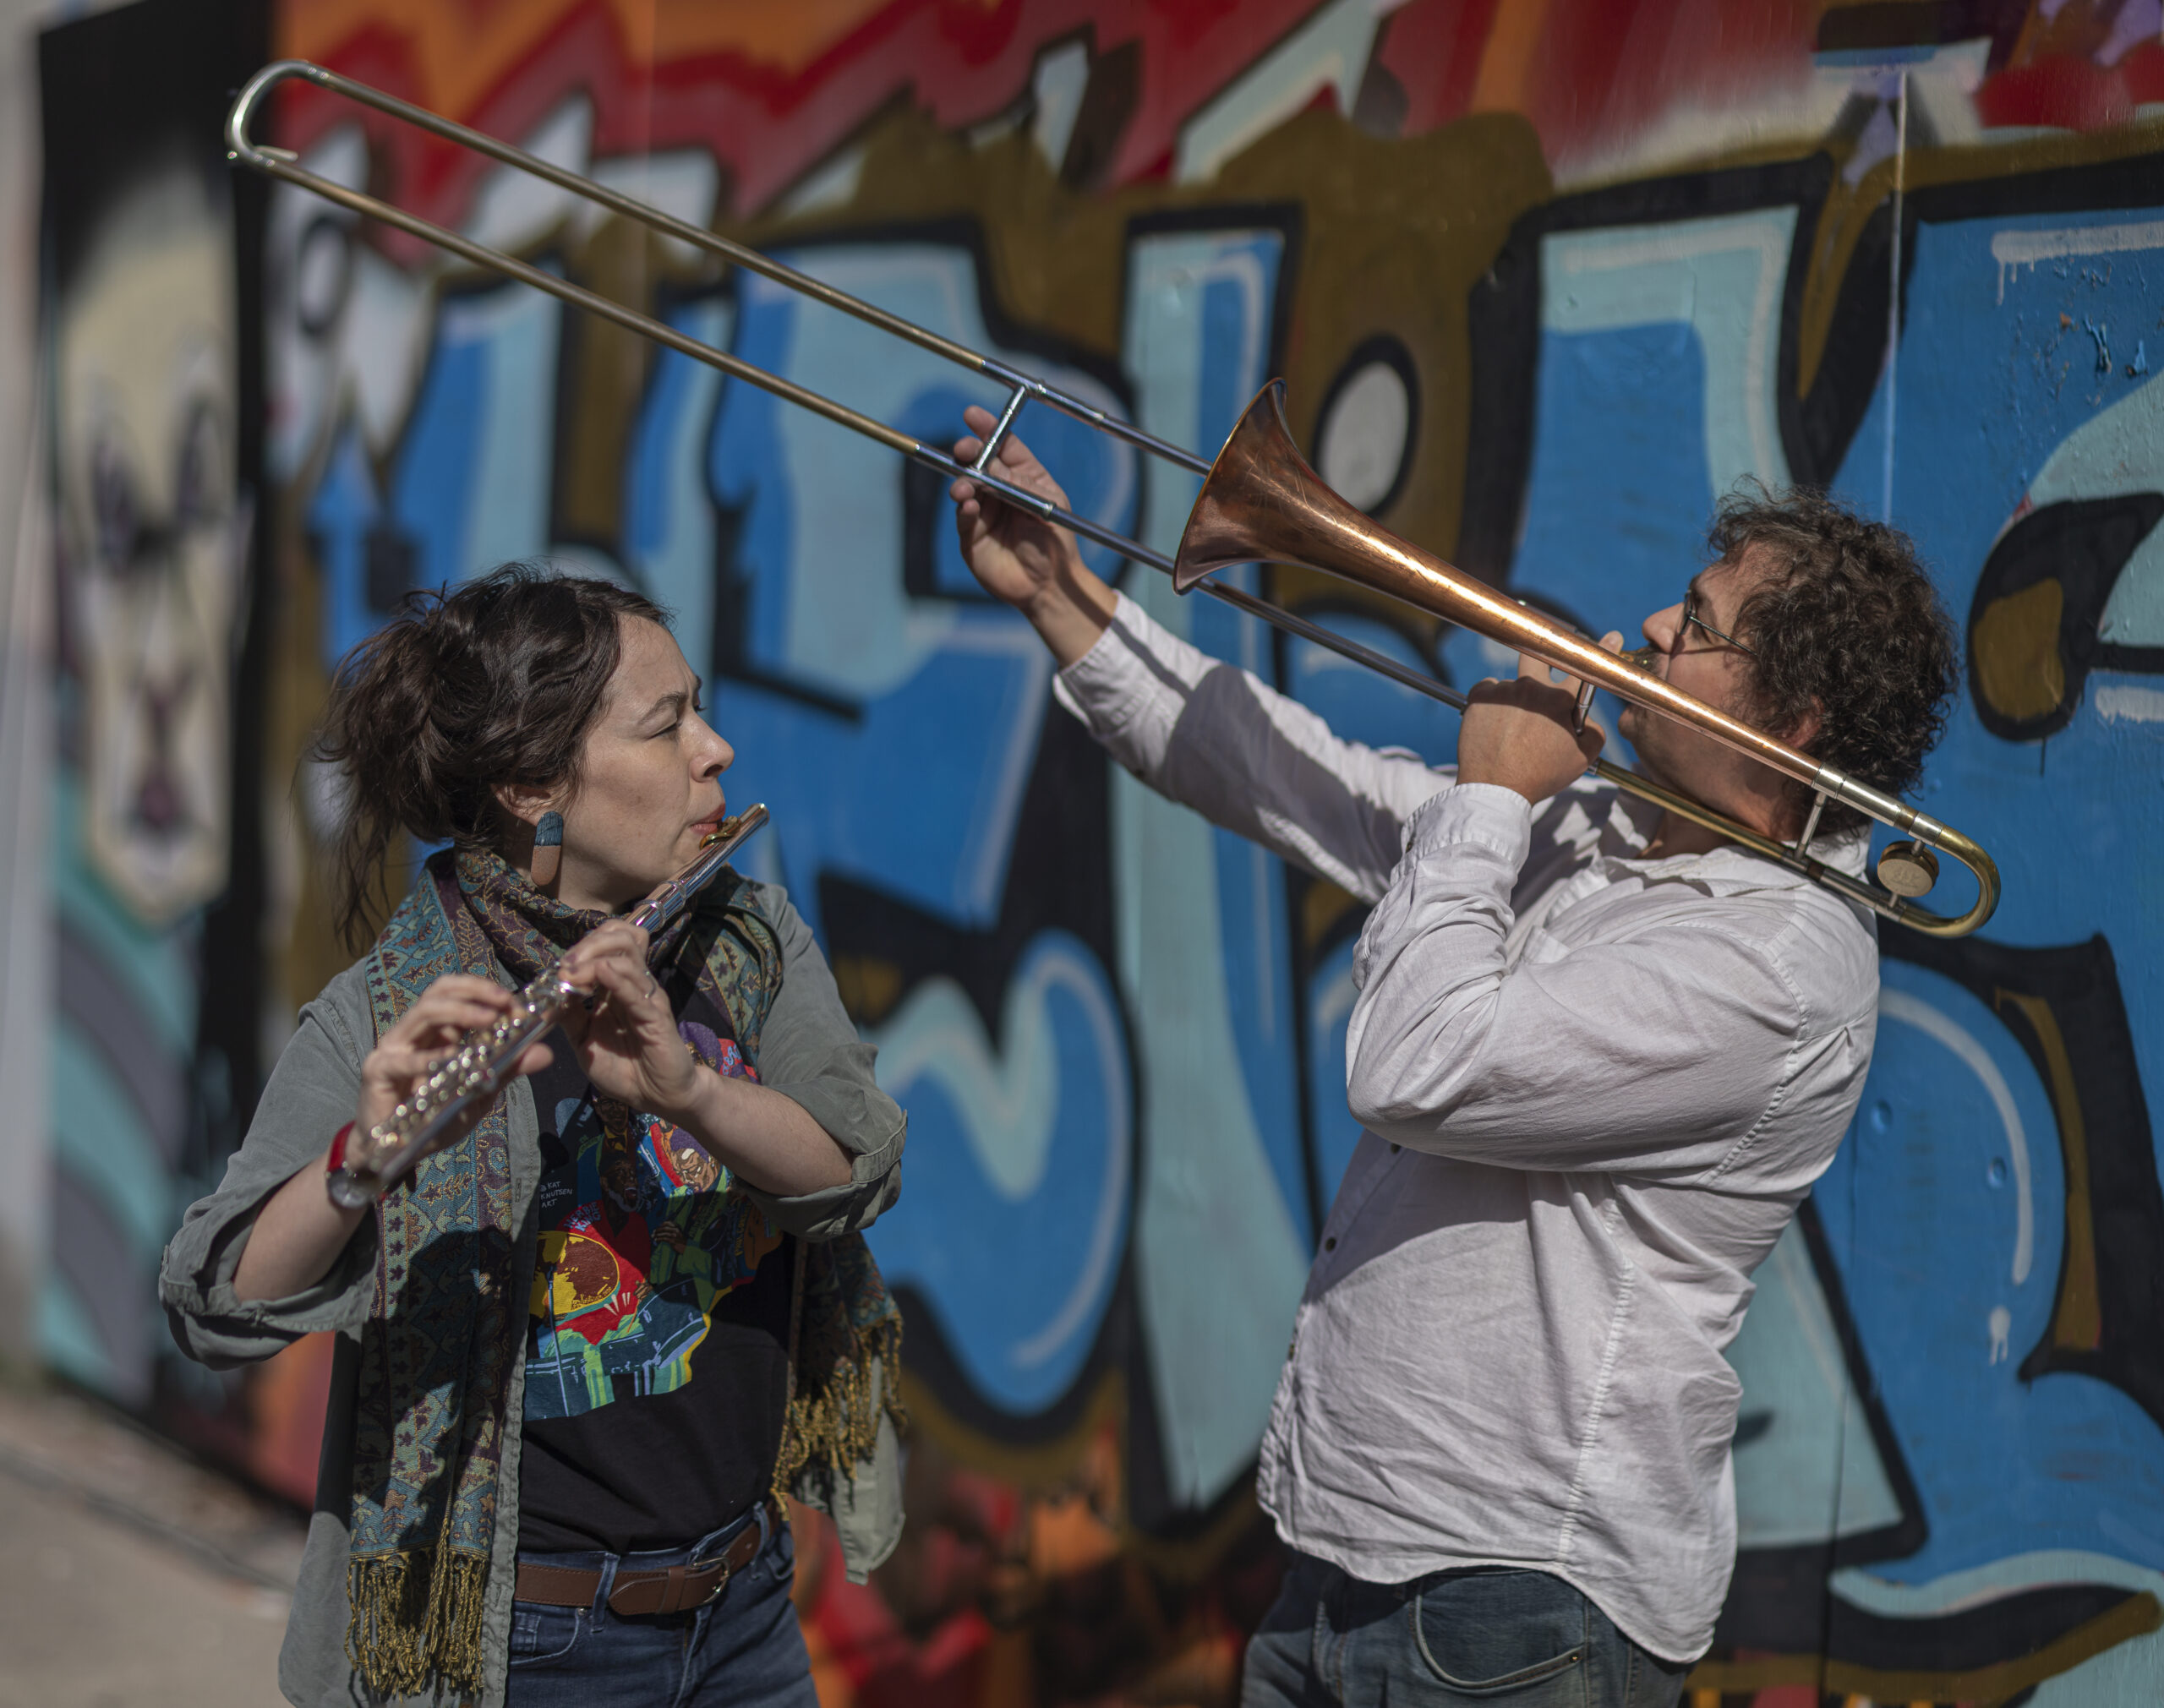 A flautist and trombonist performing in front of a mural.